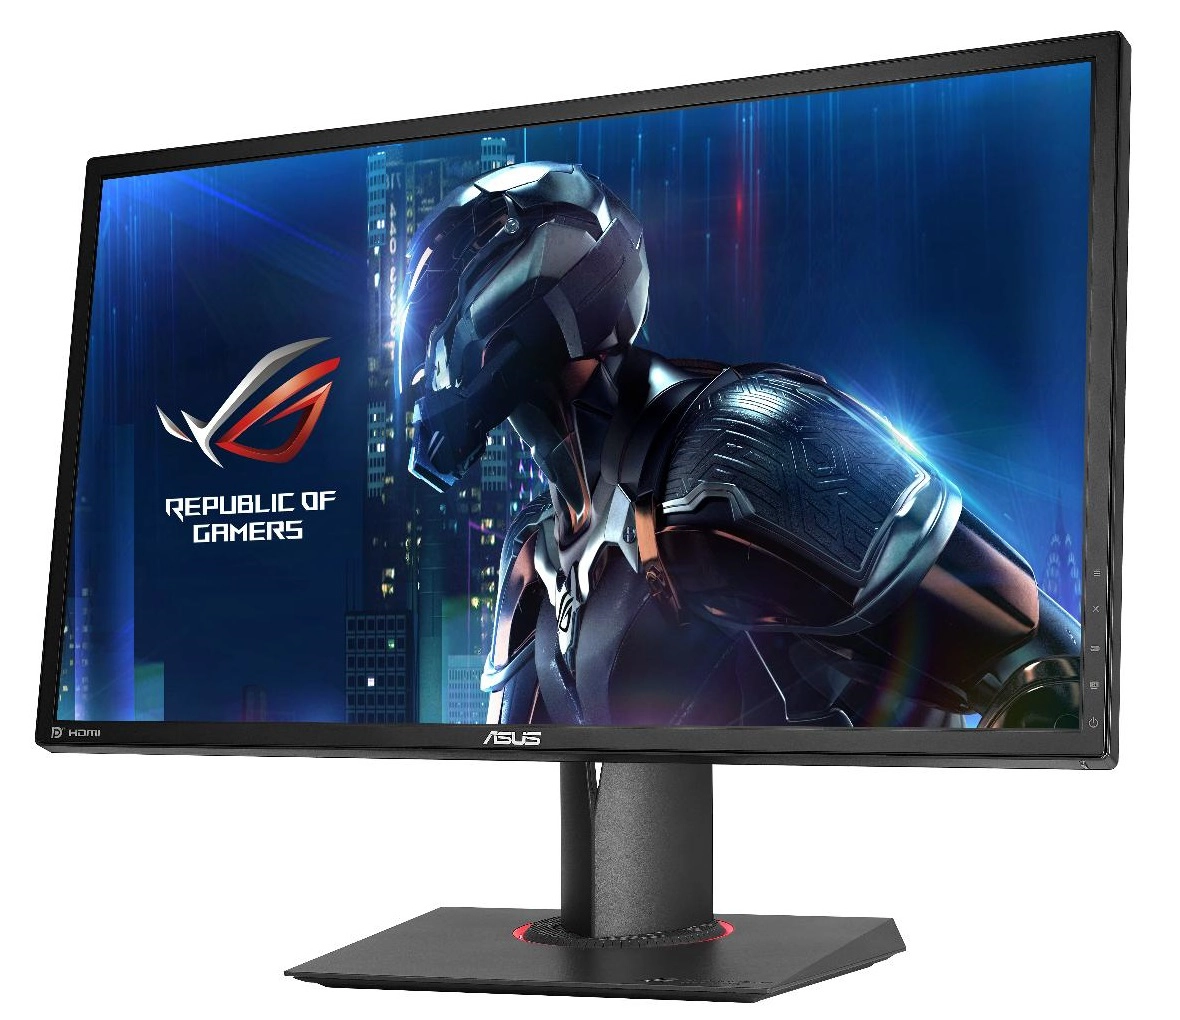 REVIEW – ASUS PG248Q 180Hz Full HD G-SYNC monitor